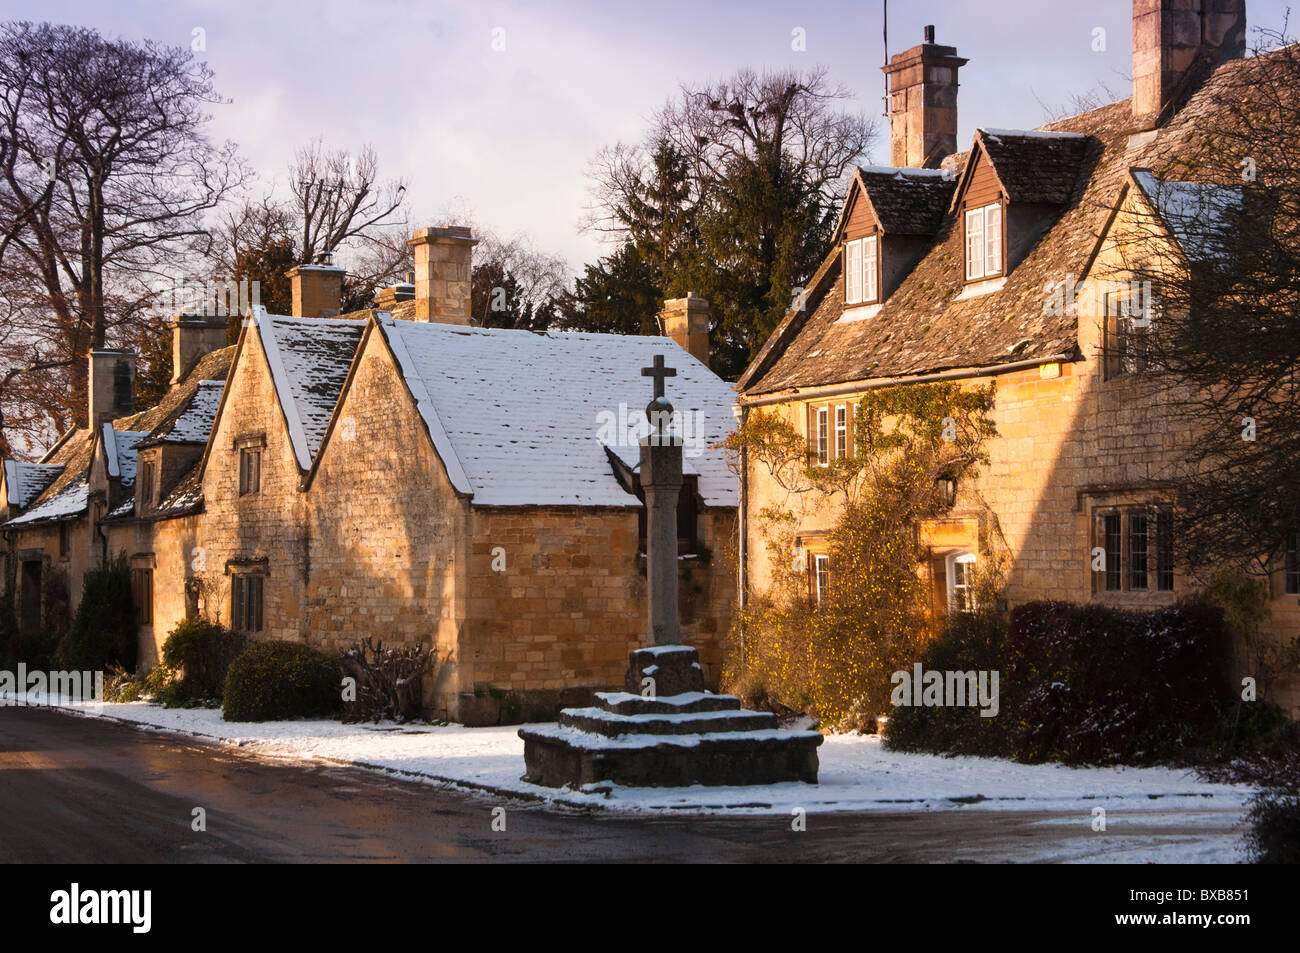 The cross outside Cross Cottage in the Cotswold village of Stanton, Gloucestershire, England Stock Photo